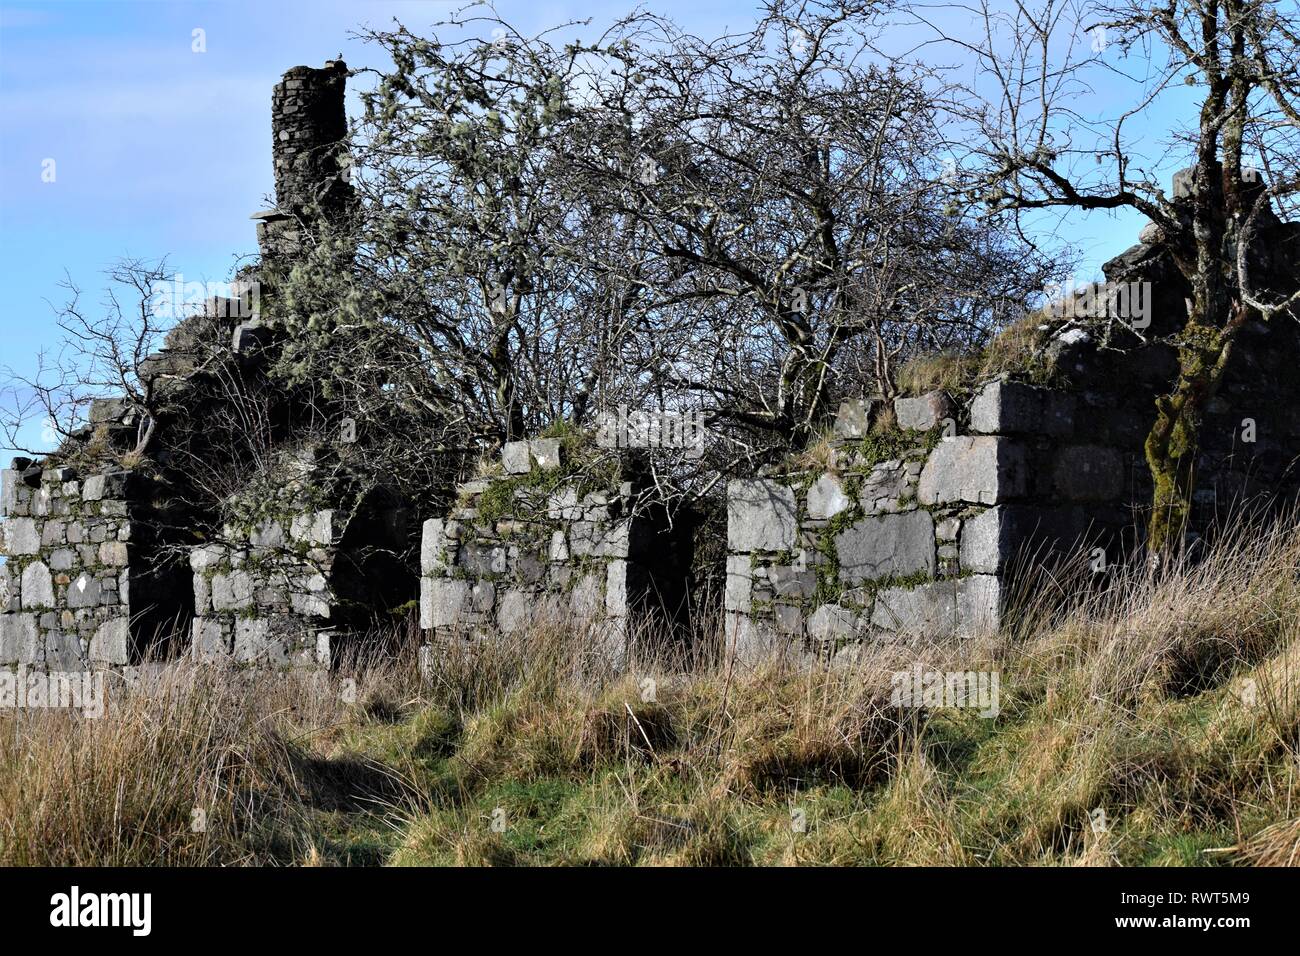 Abandoned ruined croft house filled with hawthorn trees. Gable end chimney of drystone construction. Stock Photo